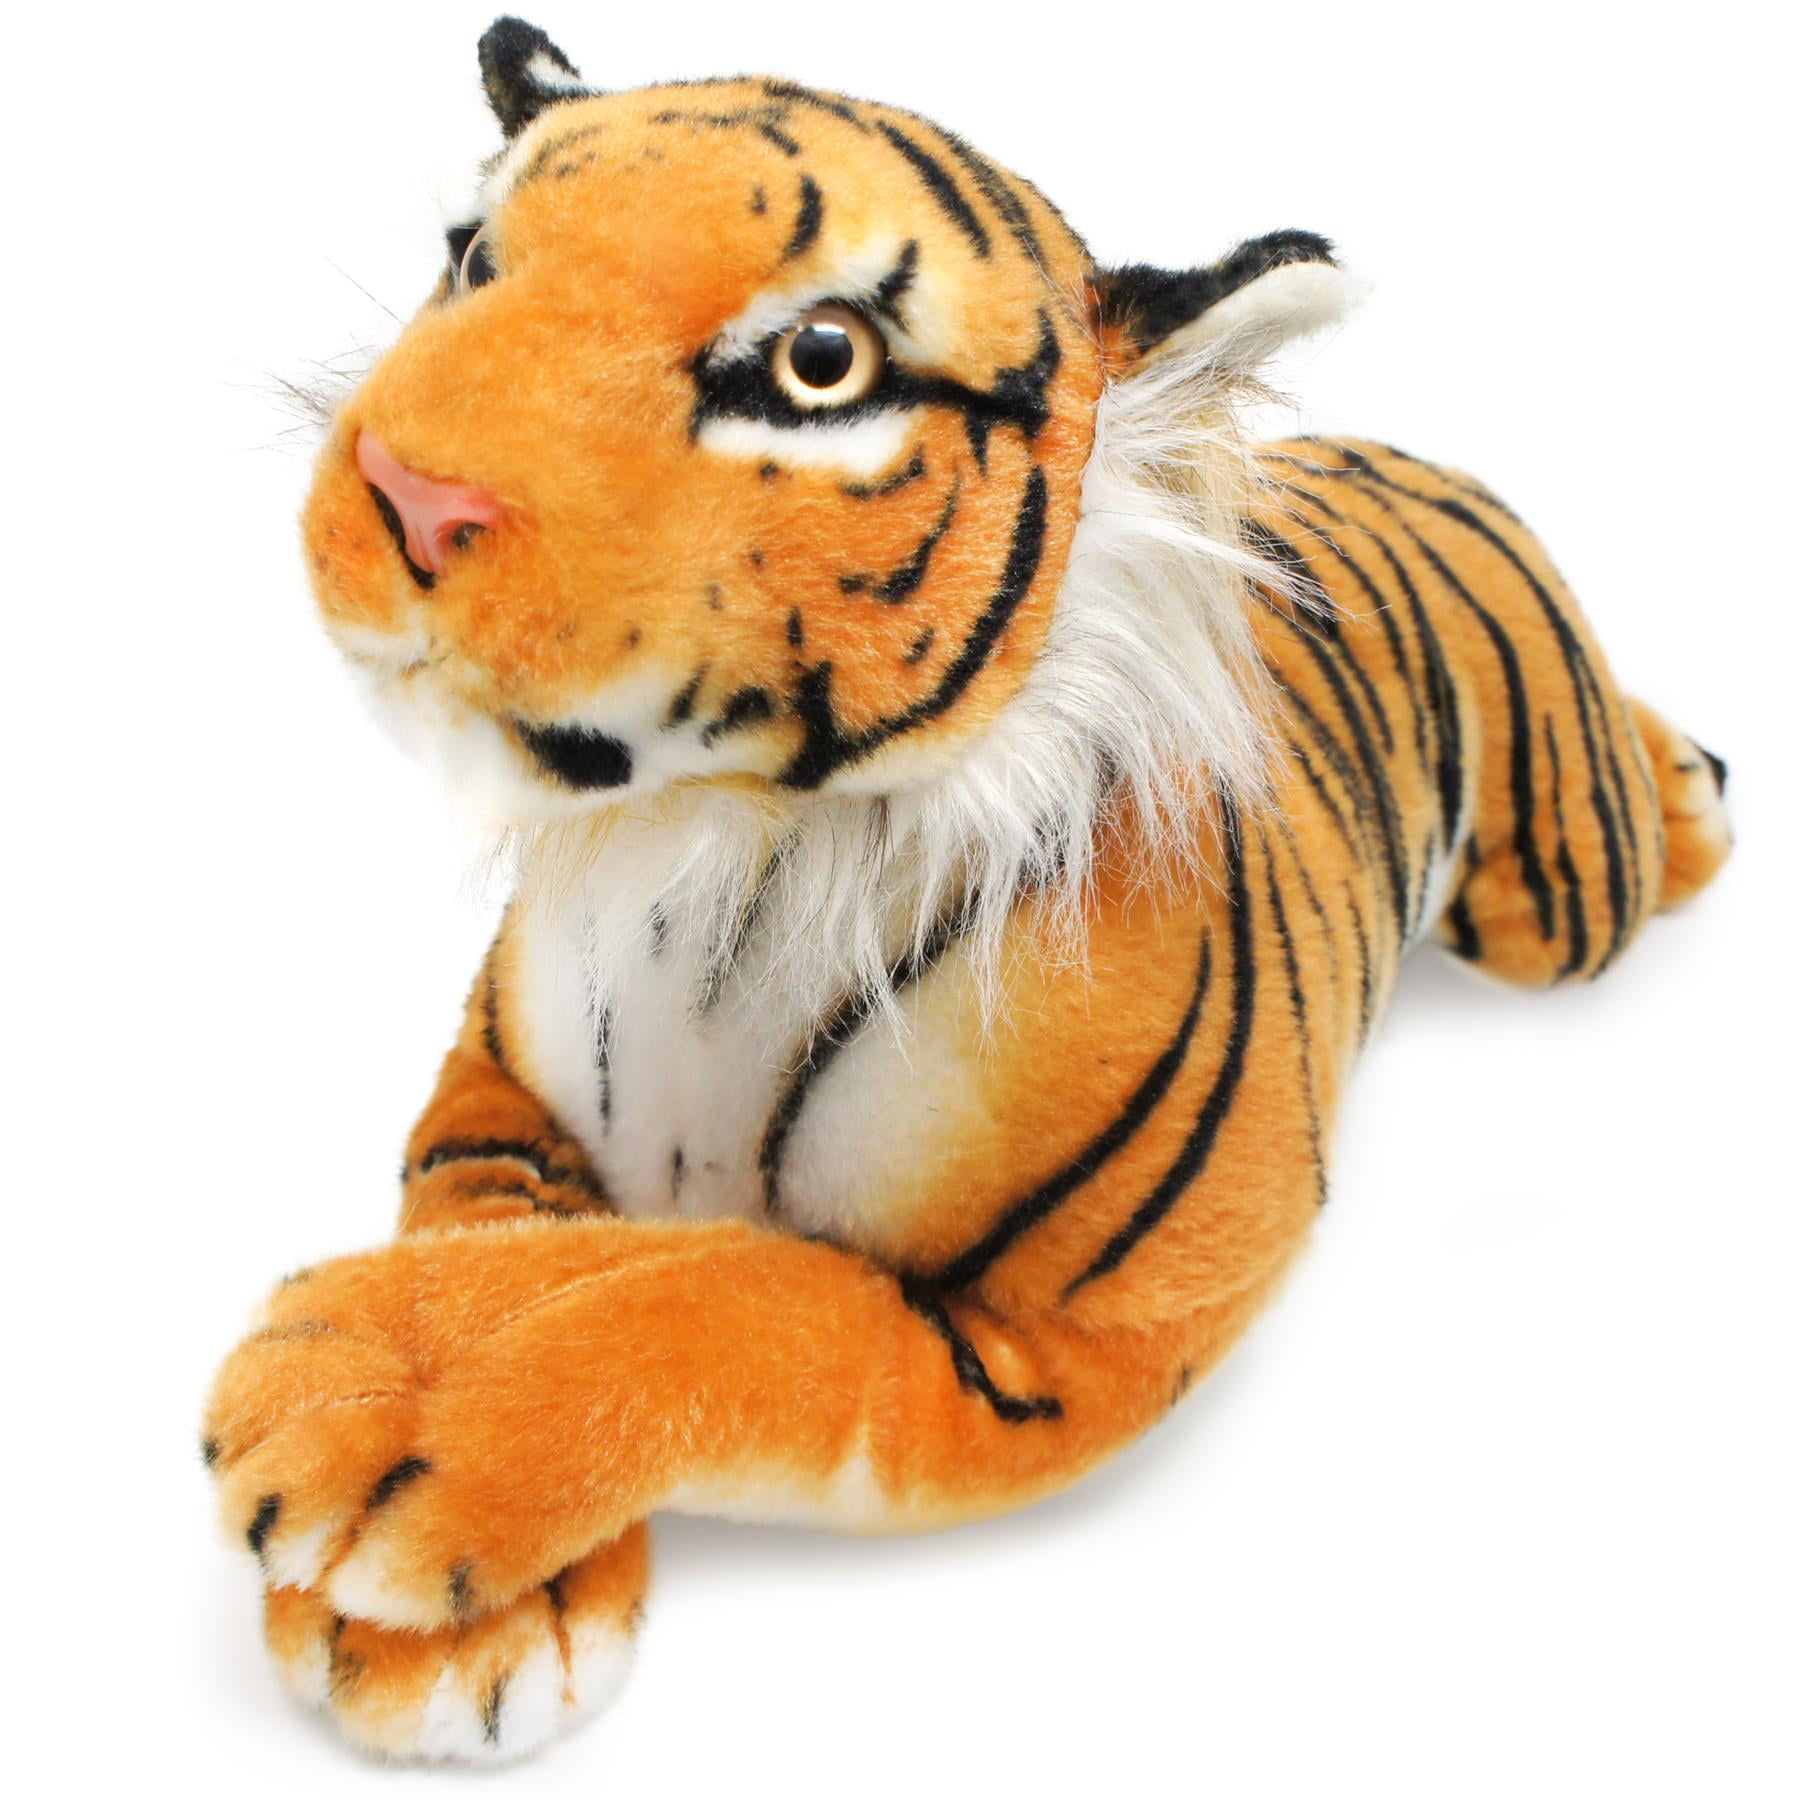 Arrow The Tiger20 Inch Stuffed Animal Plush Cat by Tale Toys for sale online